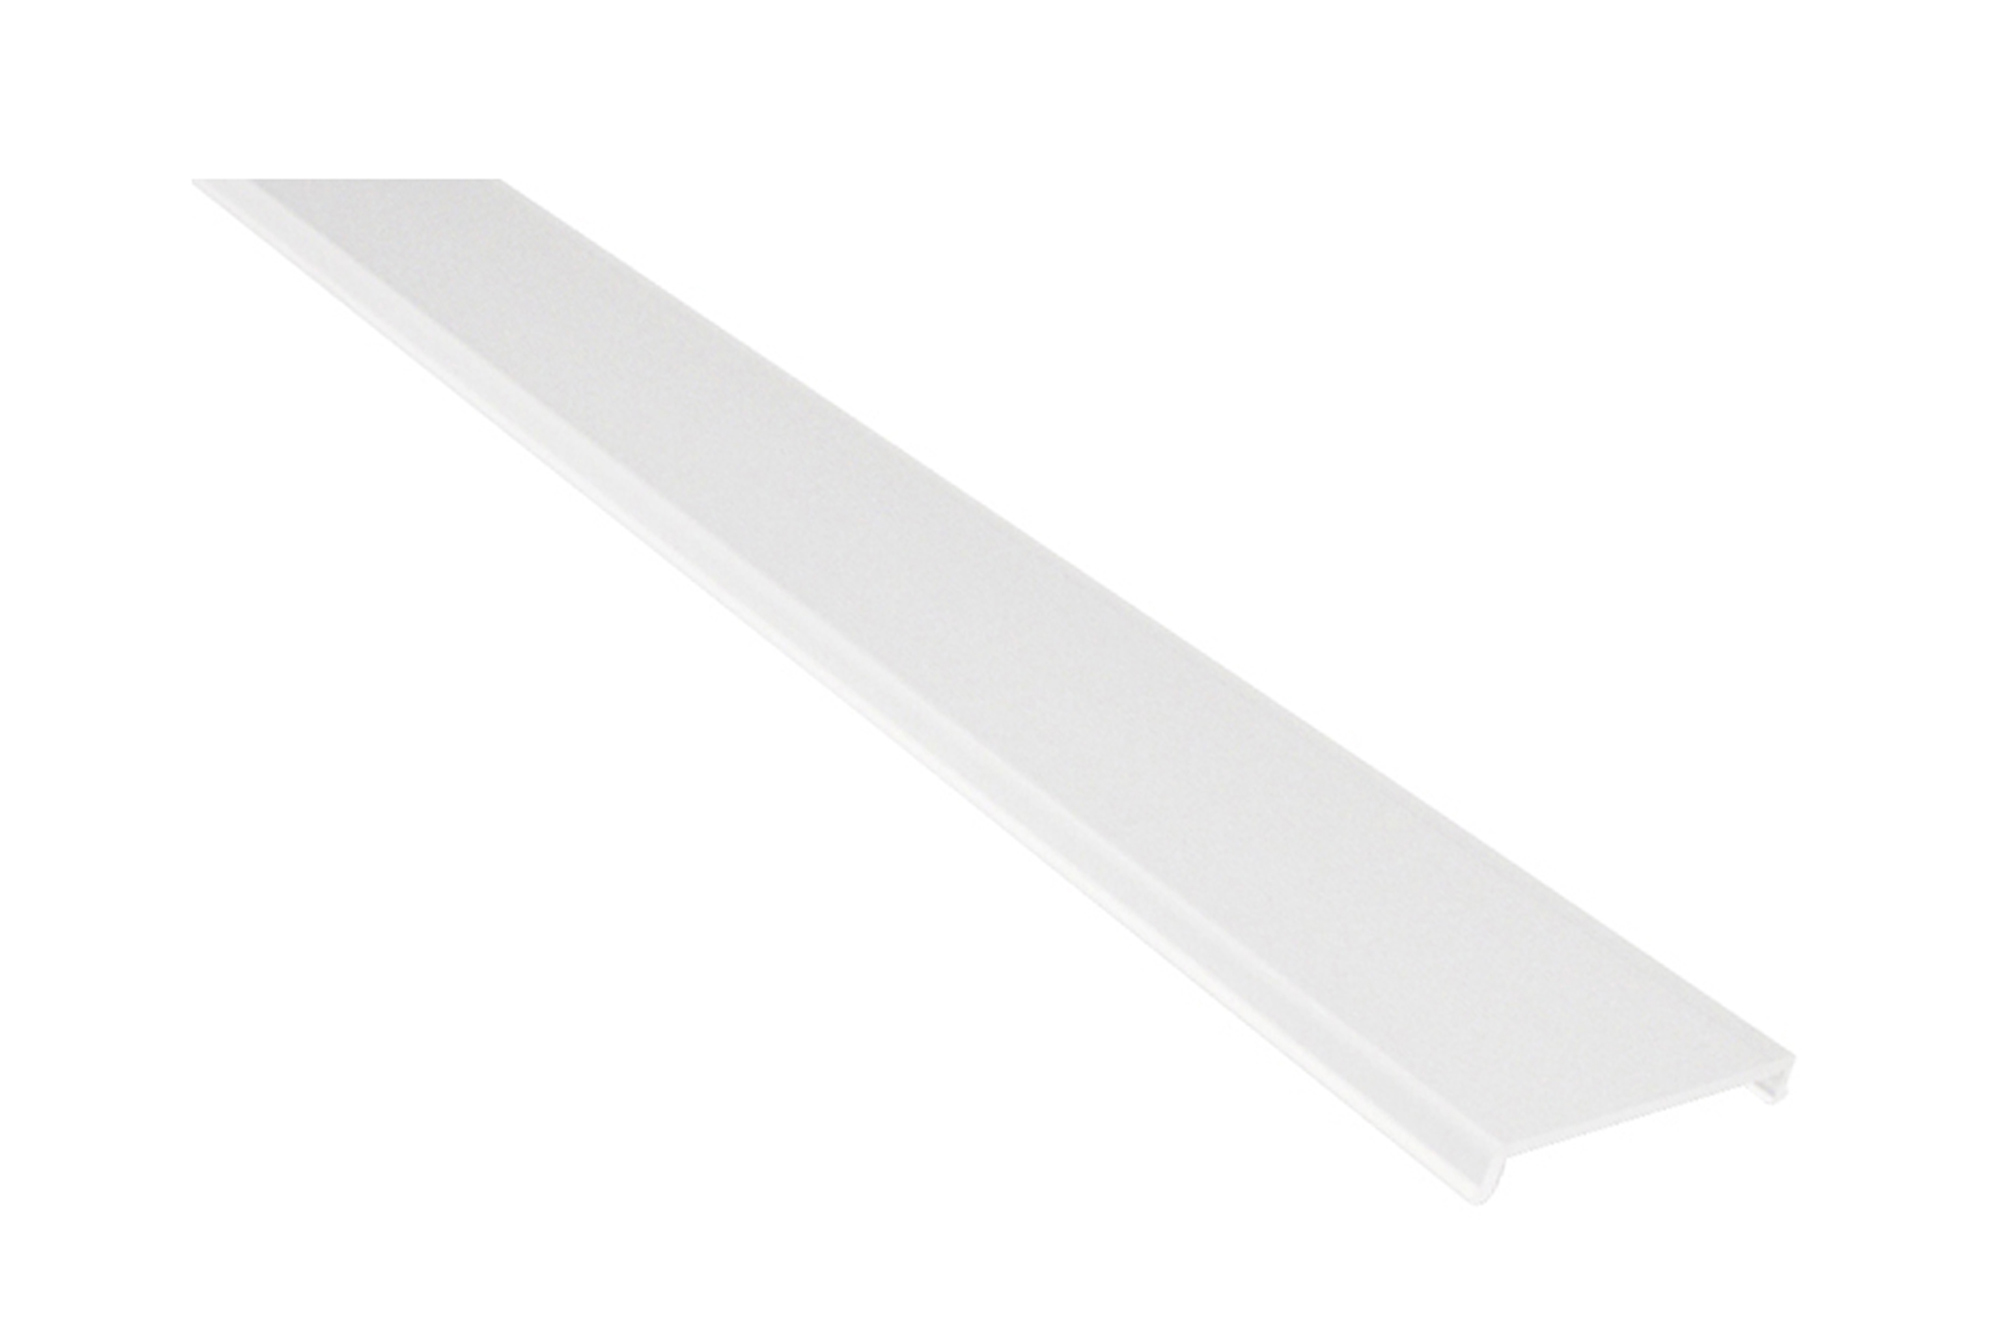 DA910046  Lin 4335W, 2m Flat Frosted Diffuser Cover For DA900034, 33mm Wide, 85% Transmittance